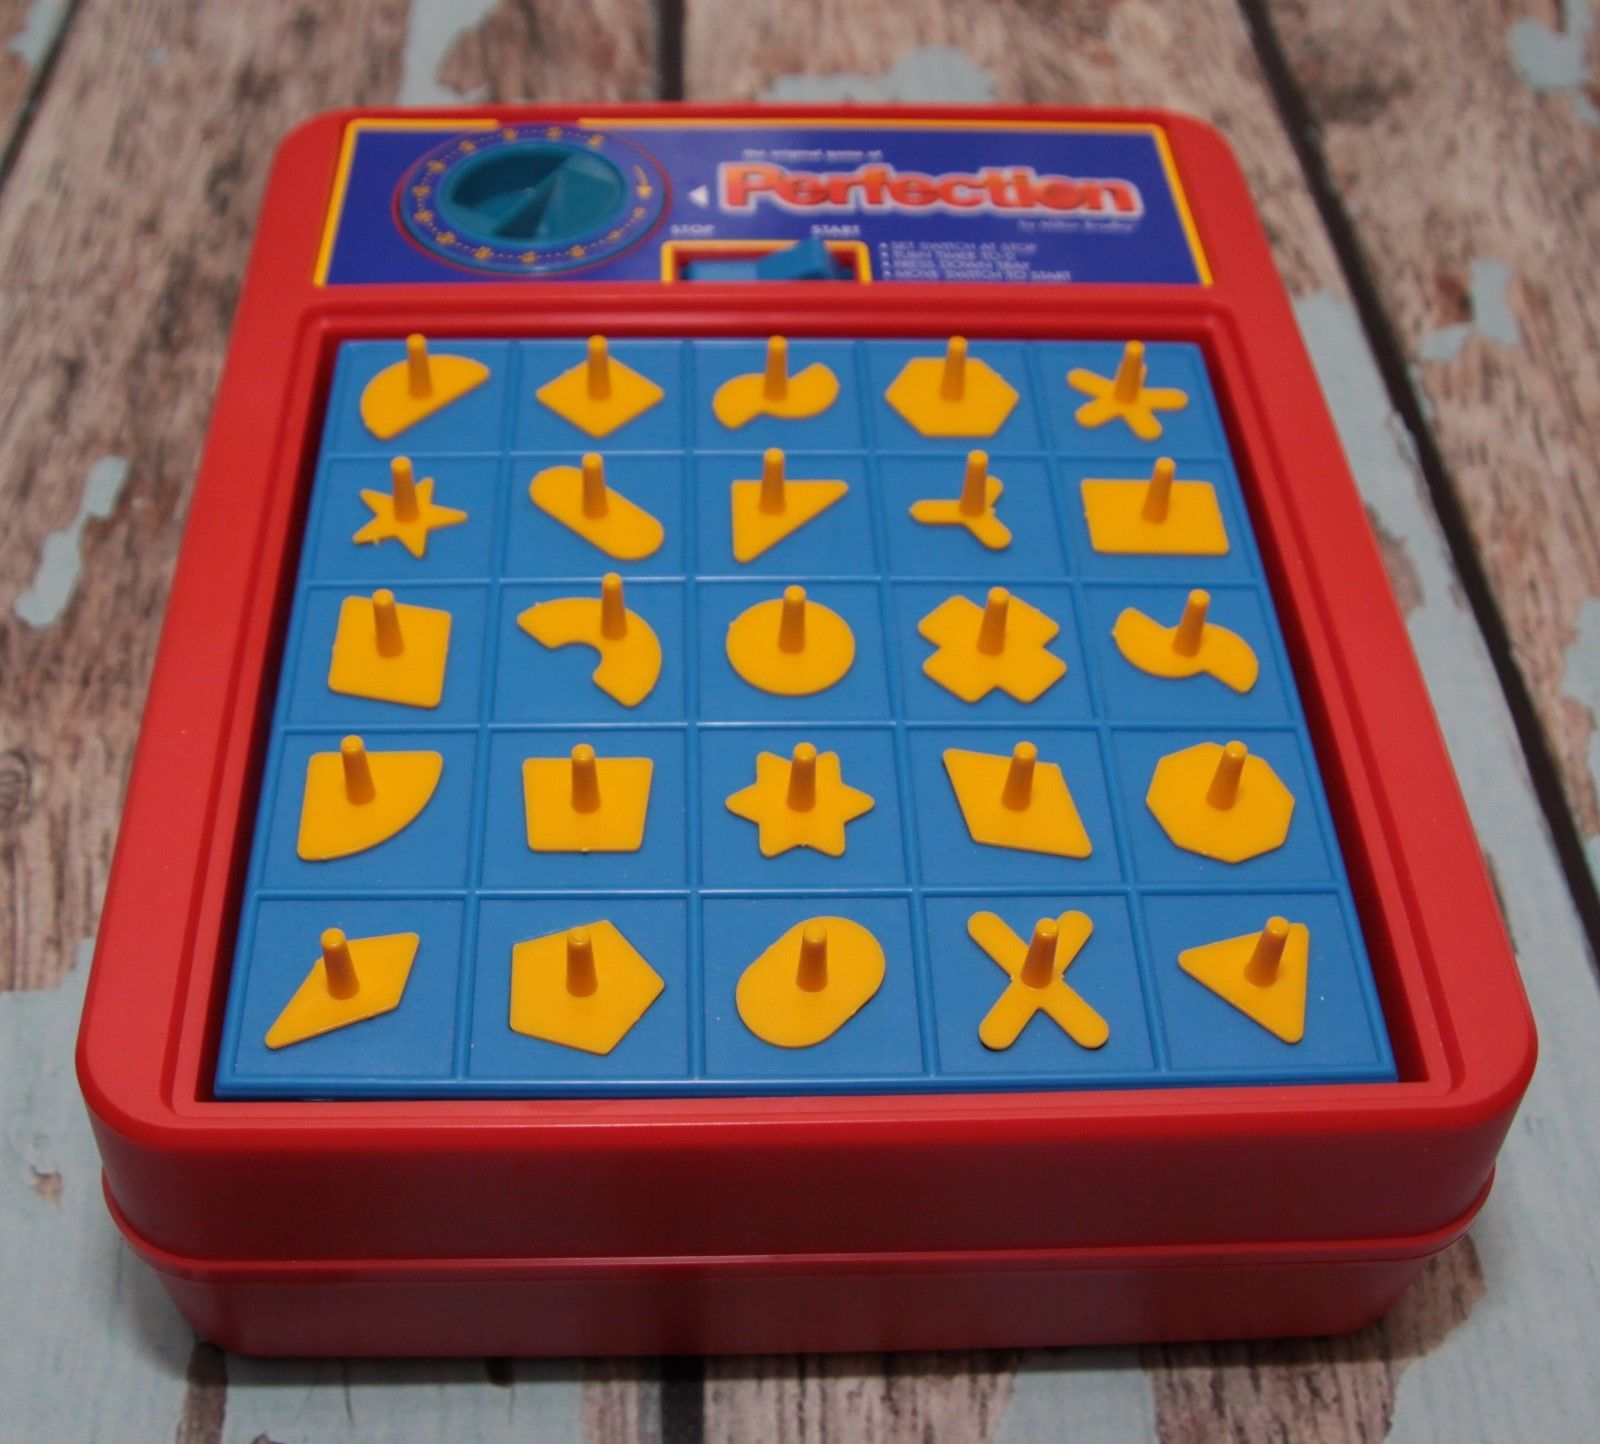 90s music toy